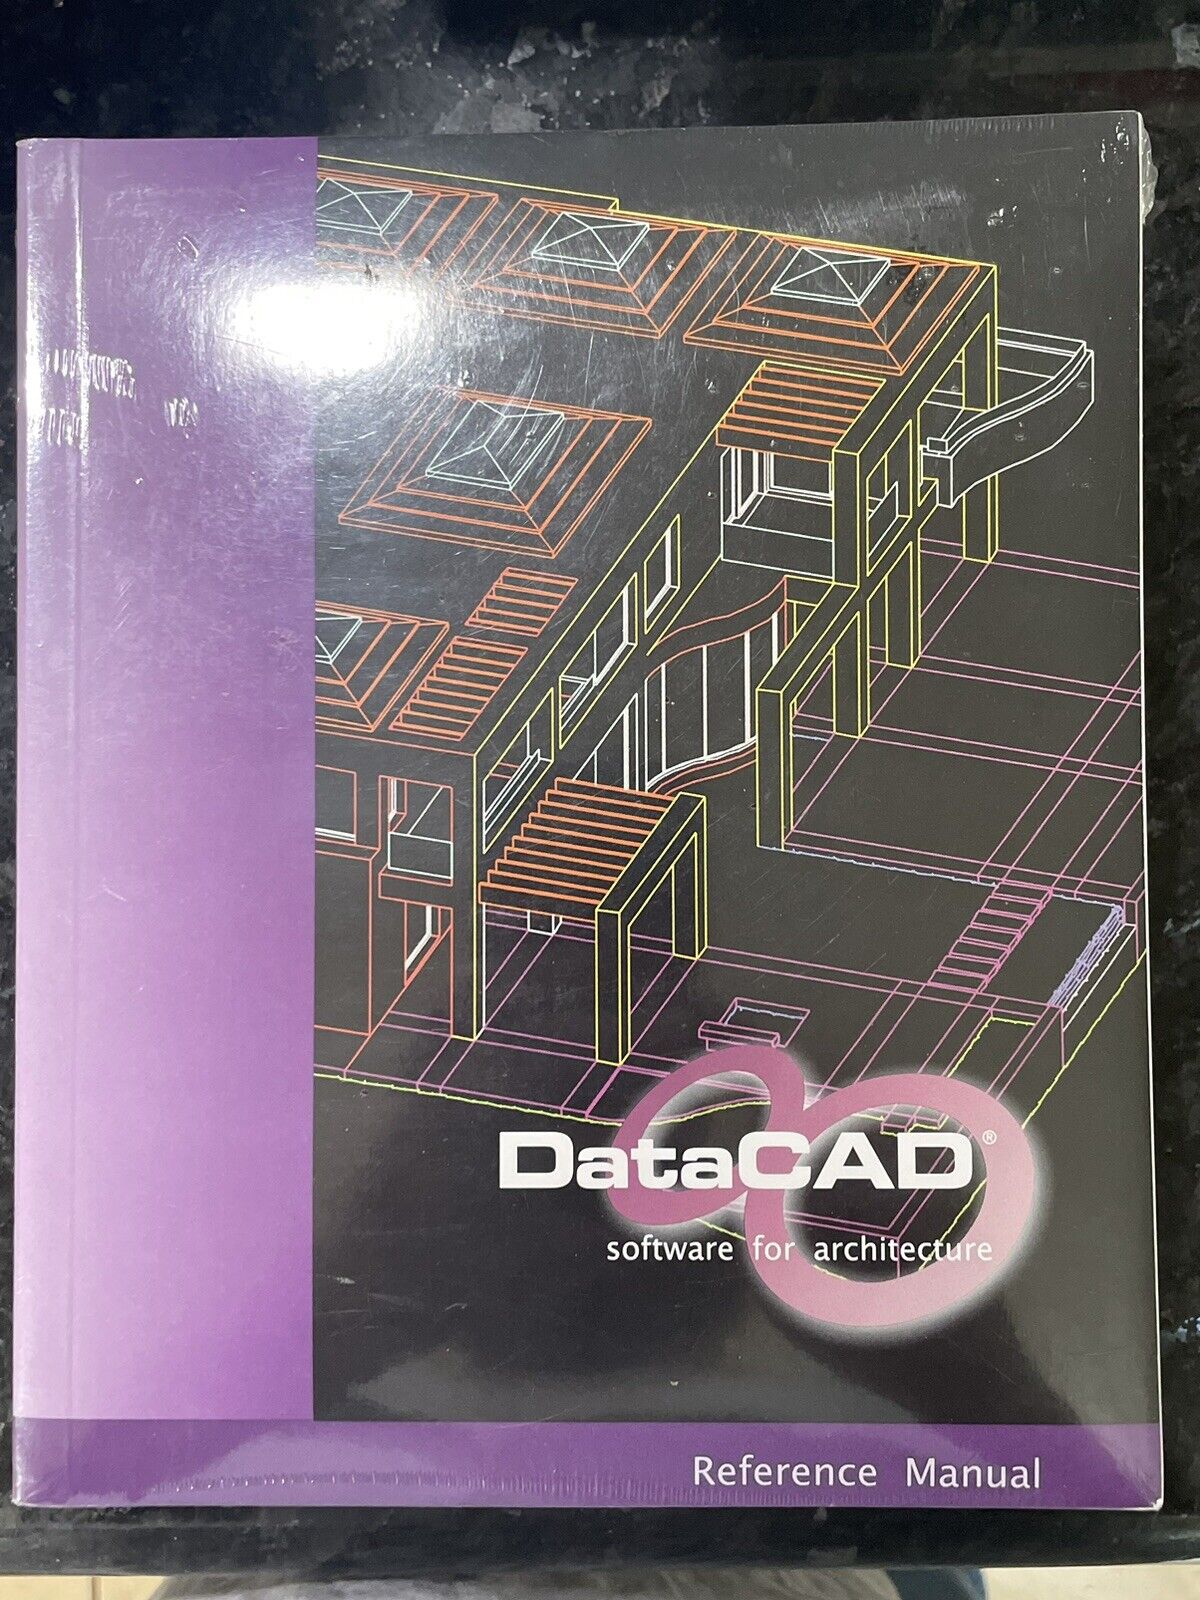 DataCAD 8.5 Manual Set Visual Reality Reference and User Manual Books Sealed